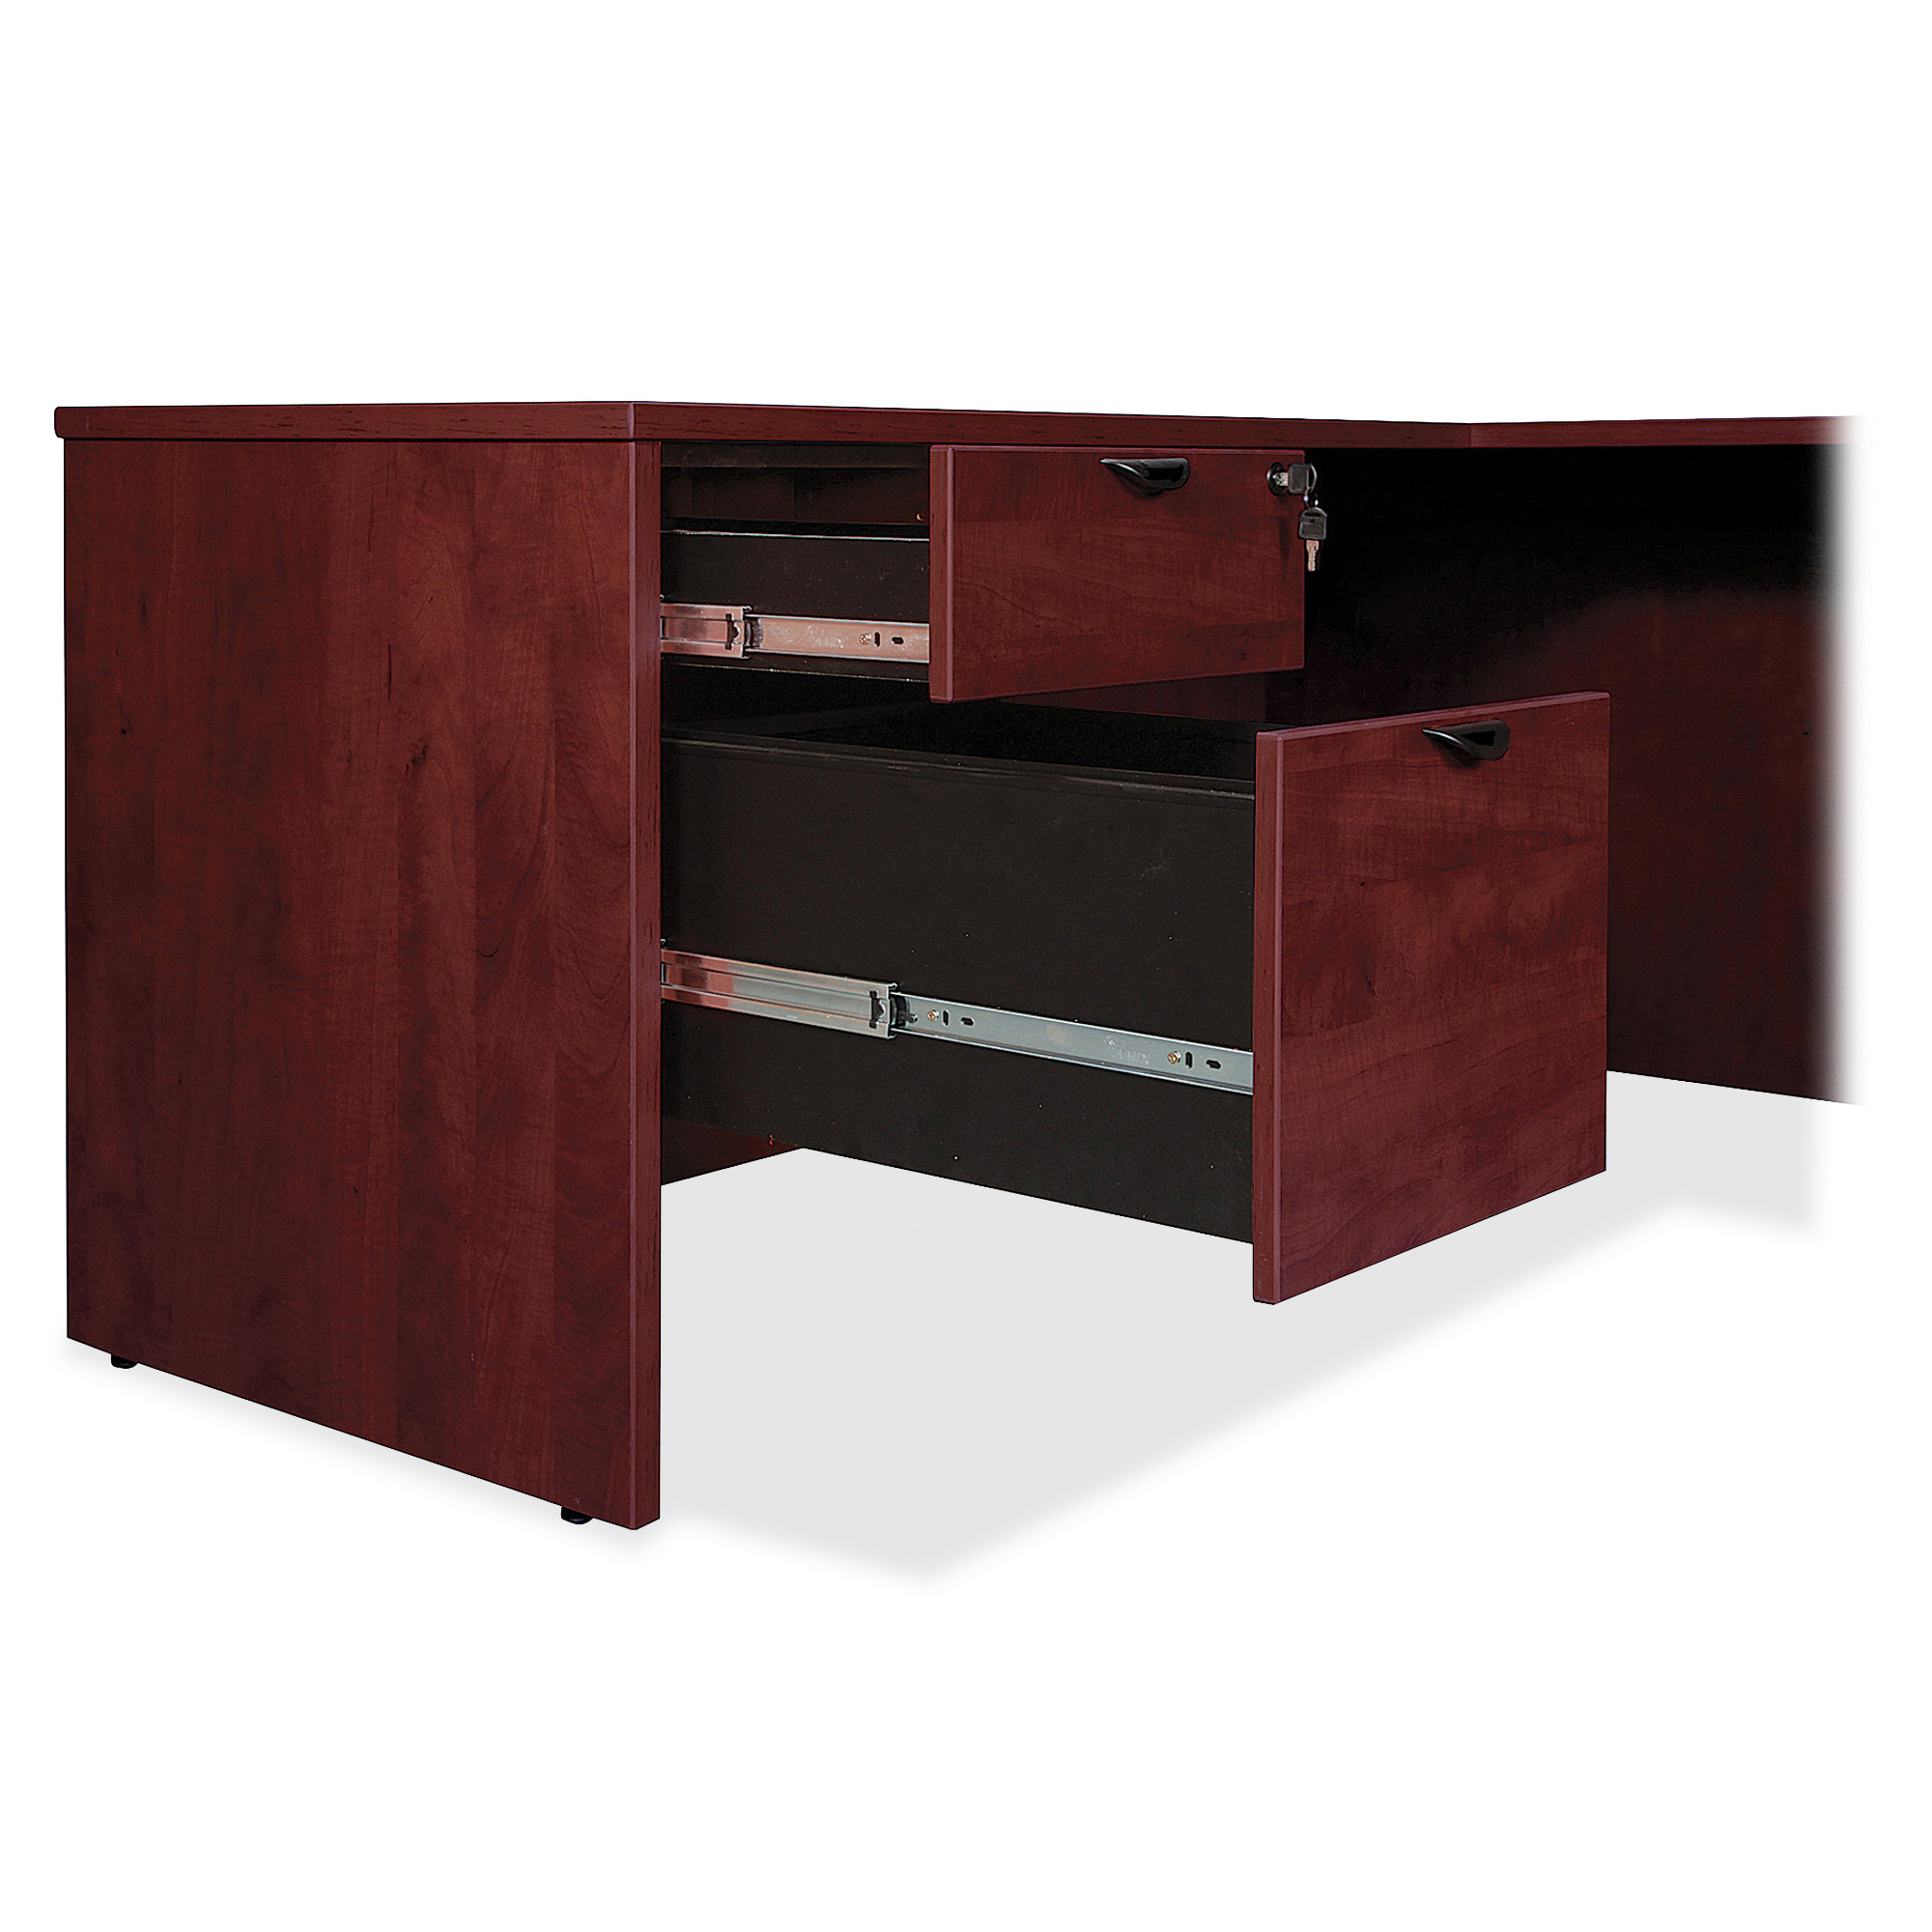 Lorell Prominence 2.0 Mahogany Laminate Lateral File - 2-Drawer 36" x 22" x 29" - 2 x File Drawer(s) - Band Edge - Material: Particleboard - Finish: Mahogany Laminate, Thermofused Melamine (TFM) - image 2 of 15